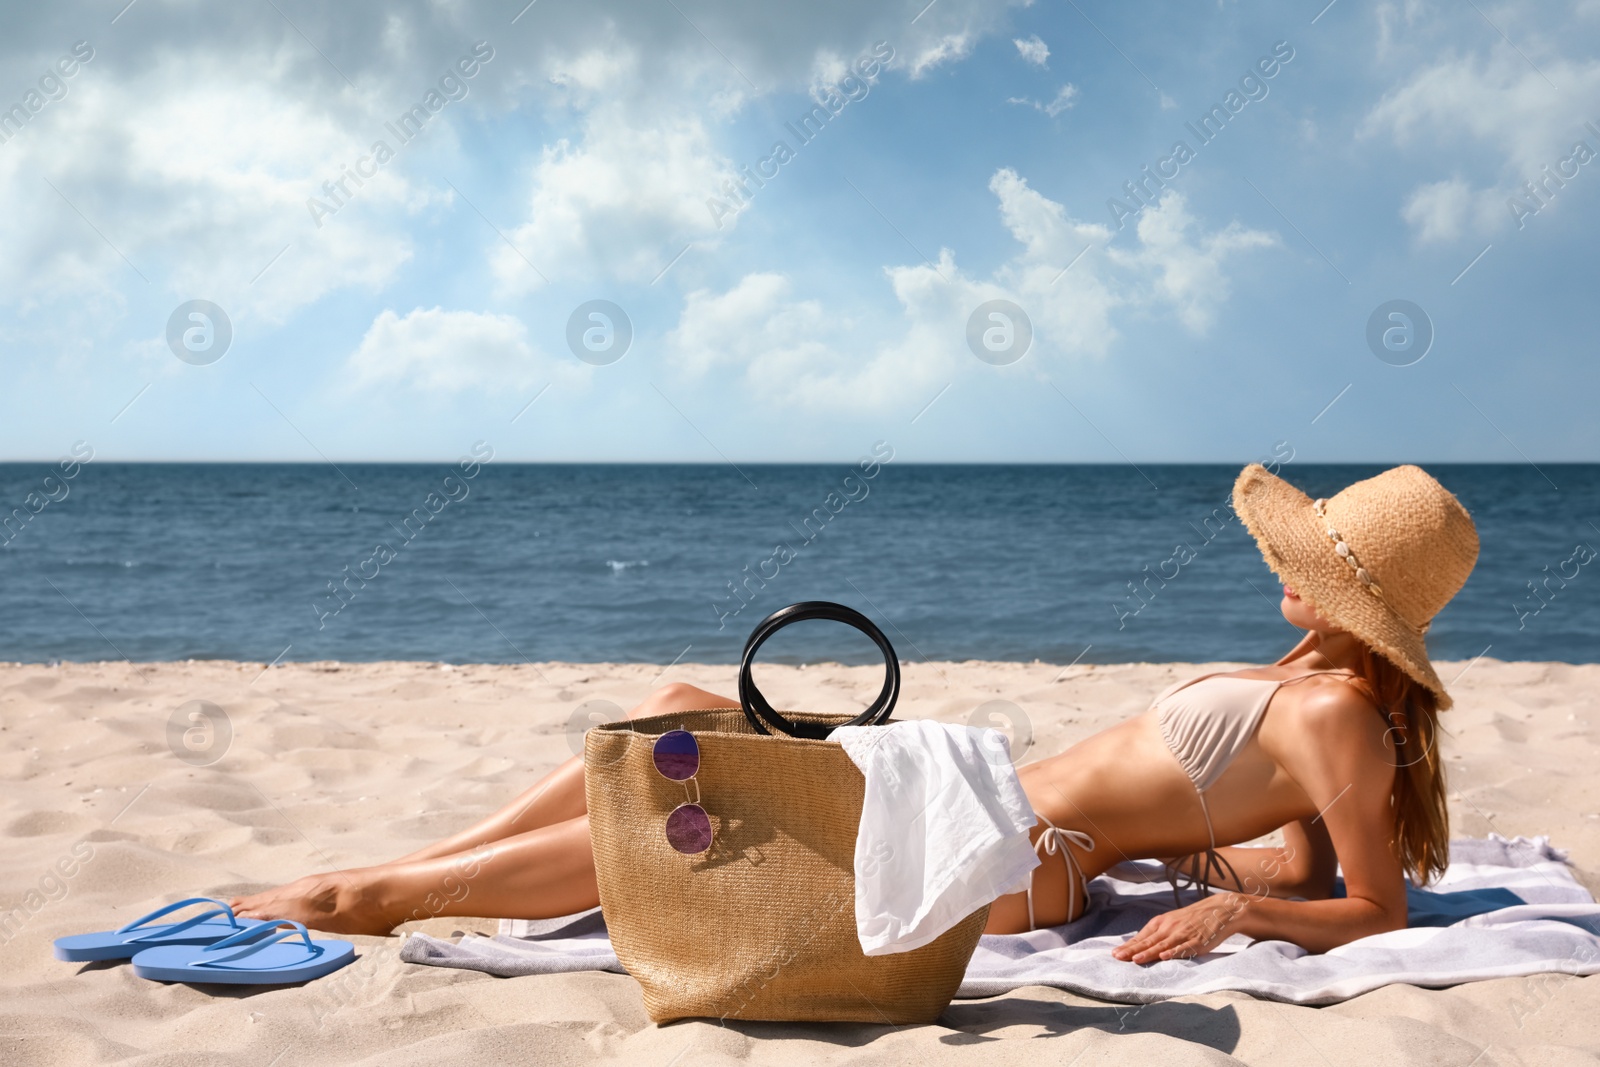 Photo of Woman with beach bag and straw hat on sand near sea